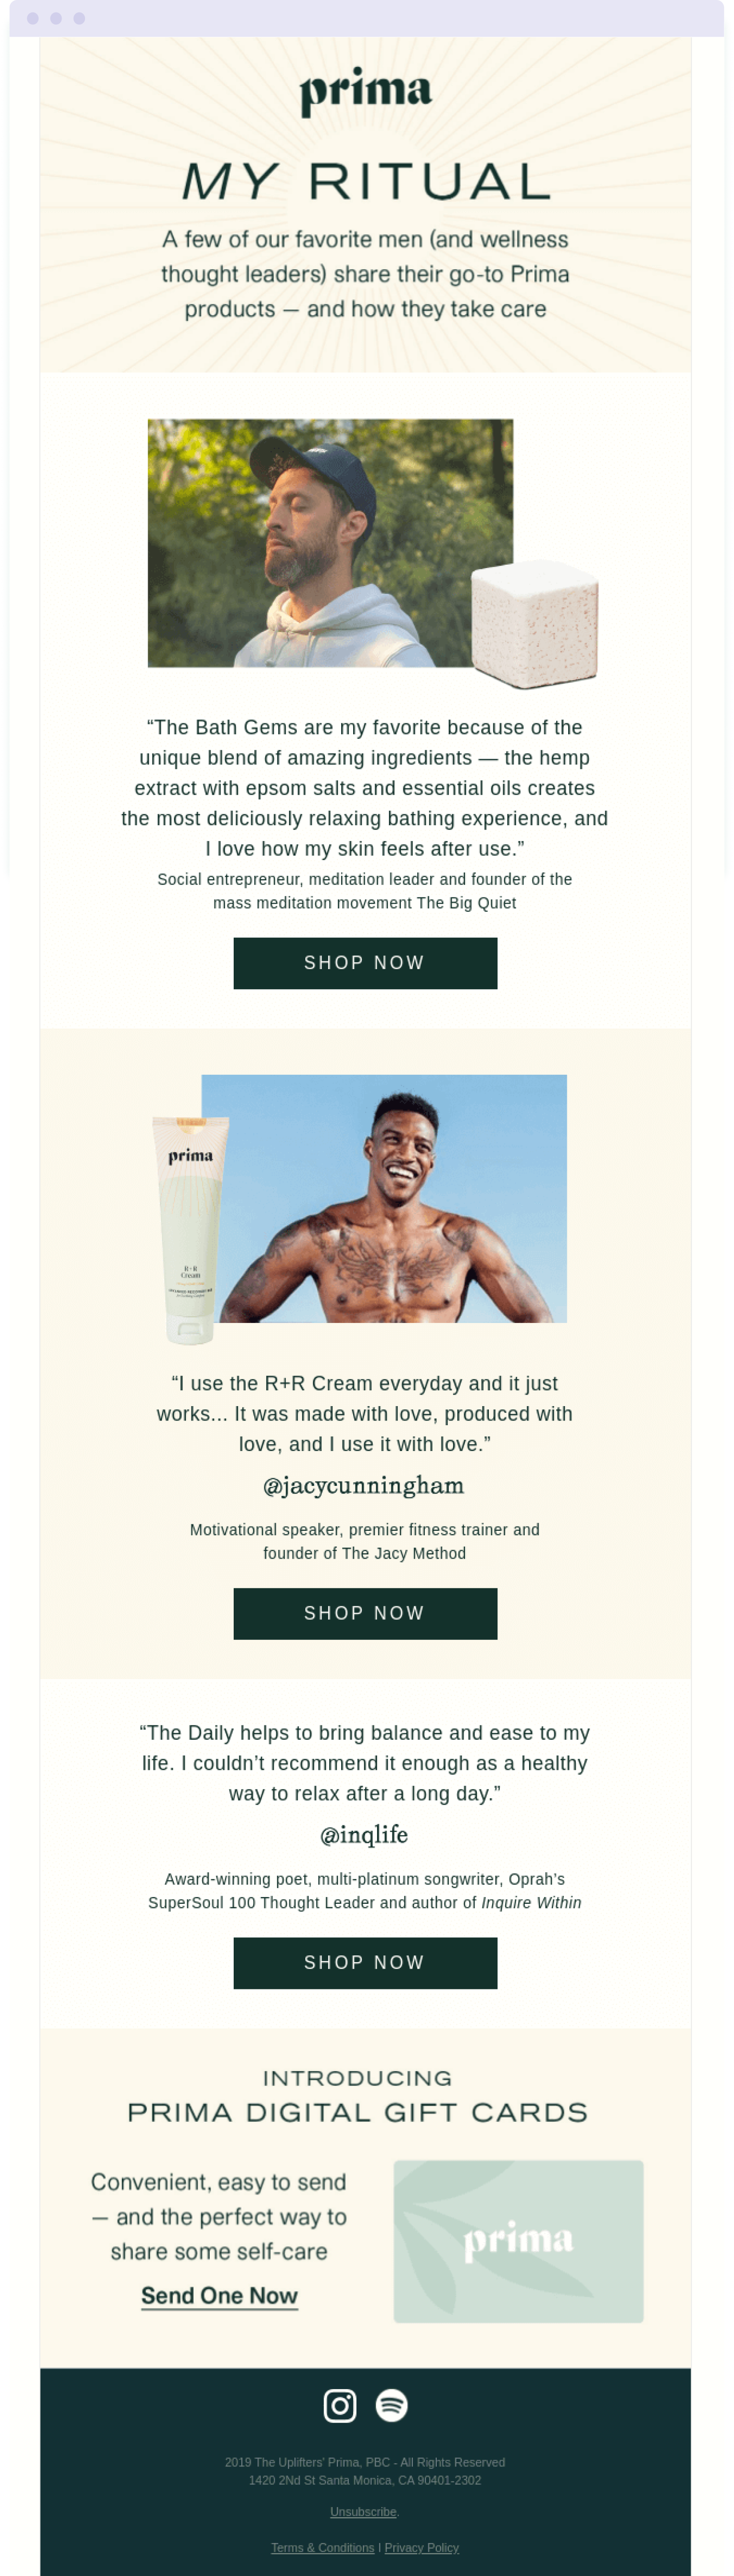 An example of an influencer email campaign from men's wellness brand Prima 